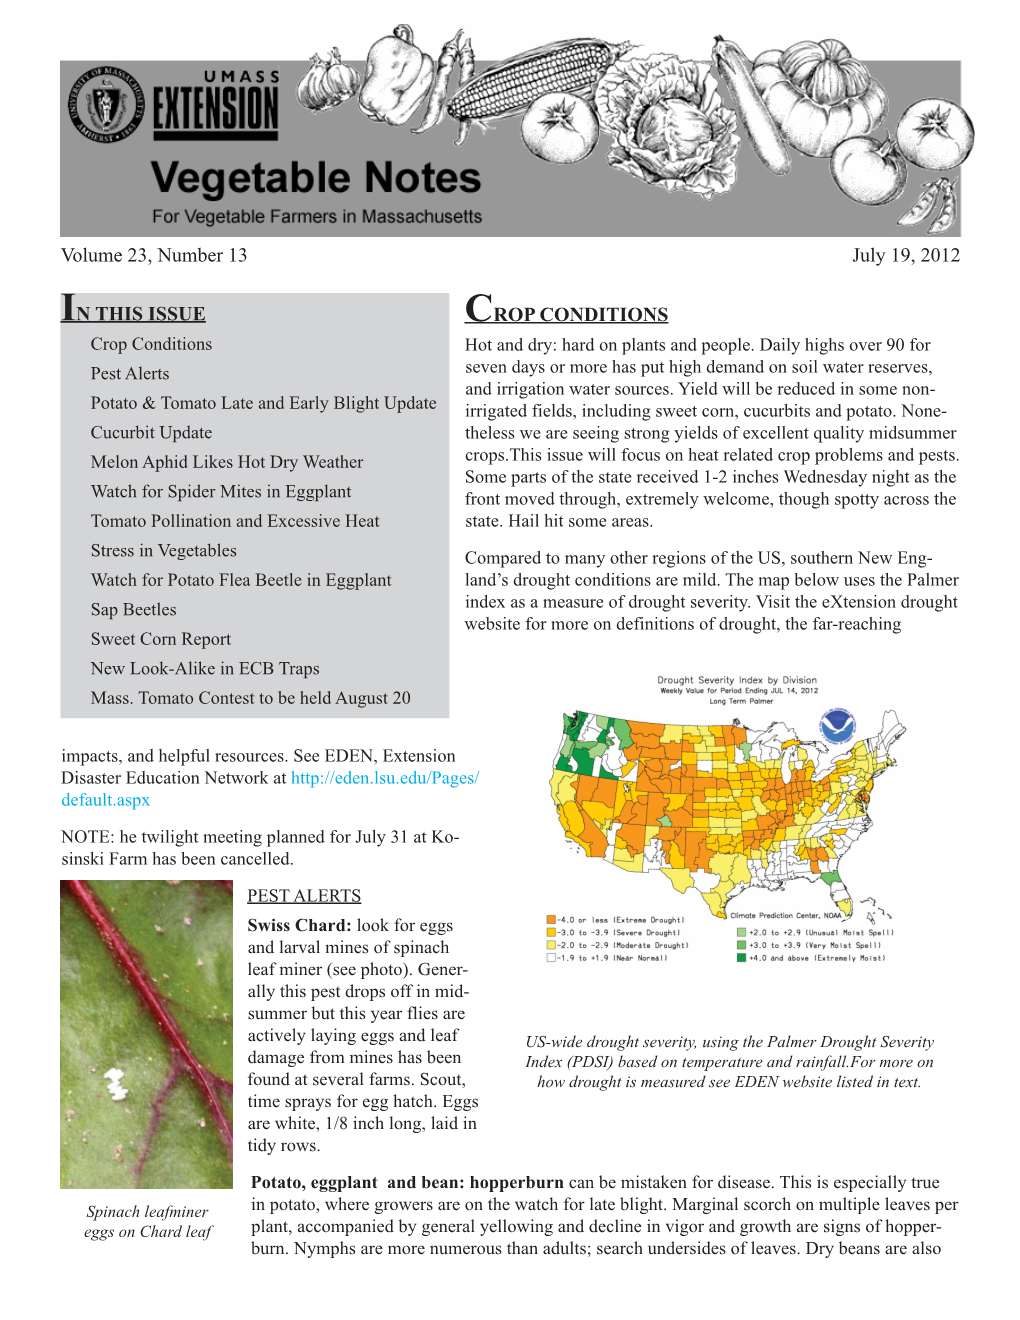 July 19, 2012 Vegetable Notes